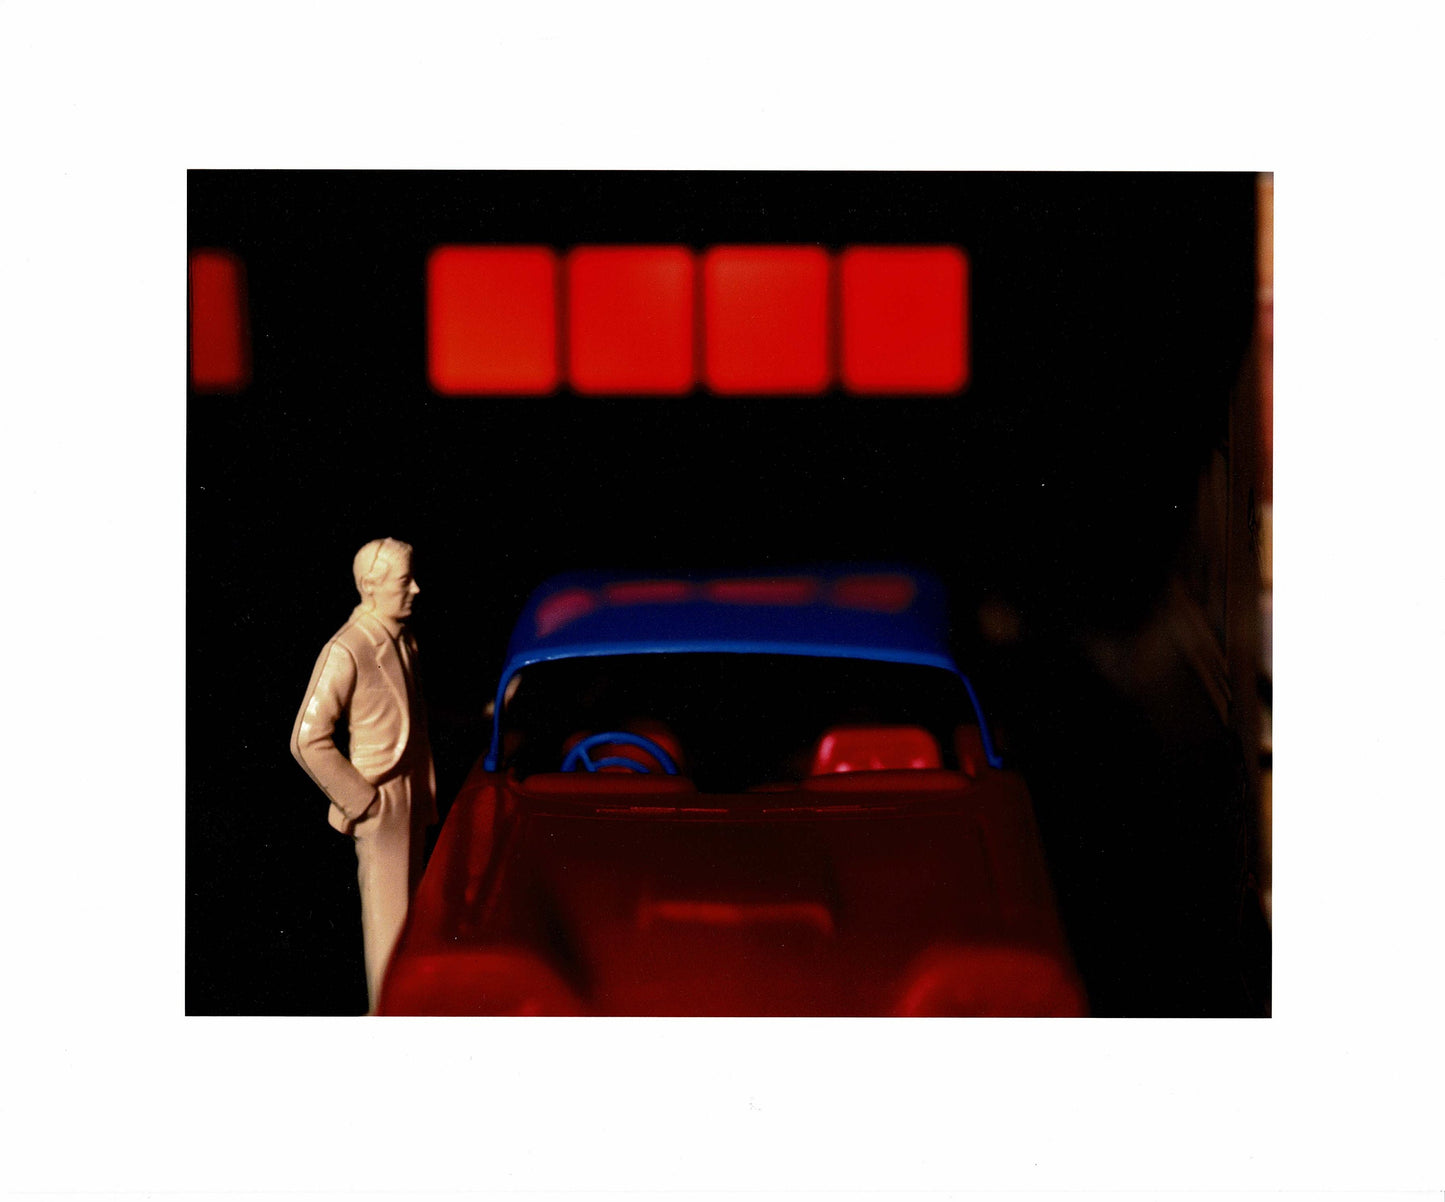 David Levinthal Photograph "Untitled, (from the series Small Wonder), 1996" Giclee Limited Edition Print